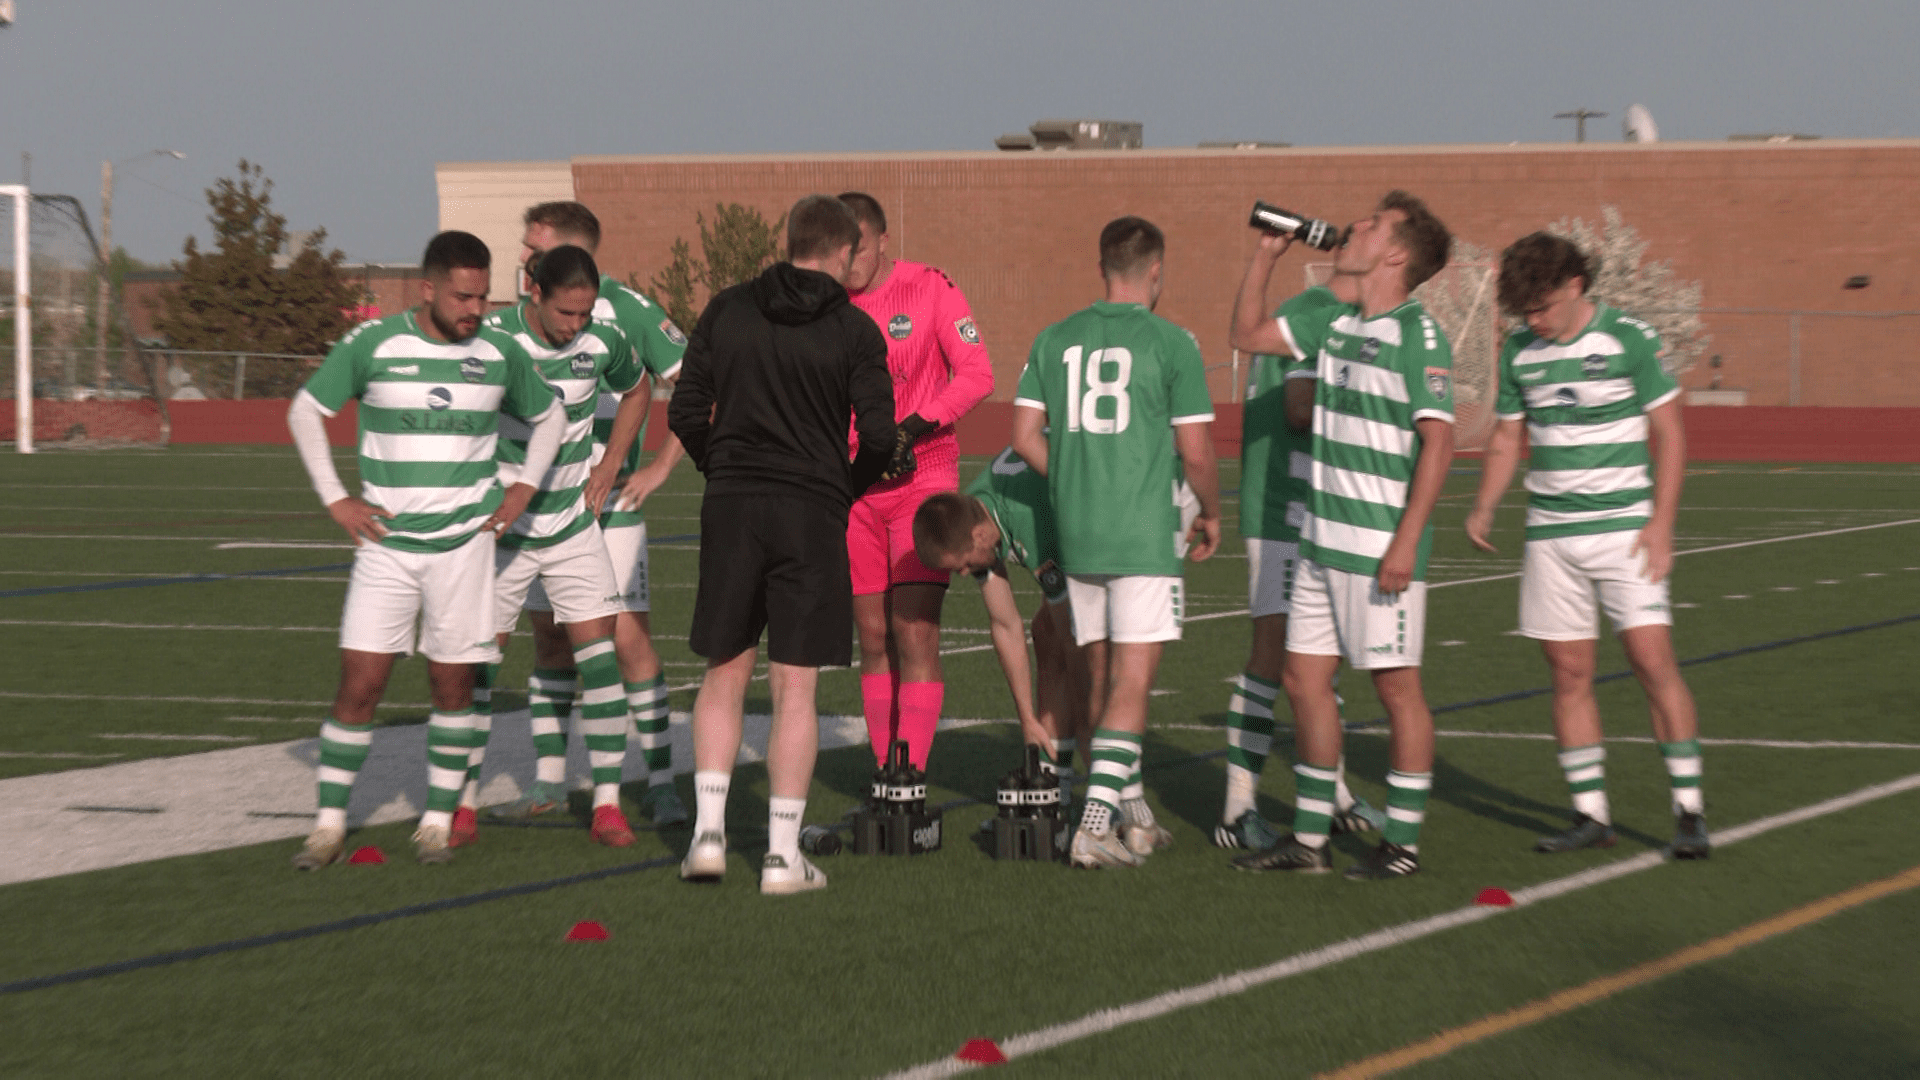 Duluth FC getting ready to play against Med City FC.